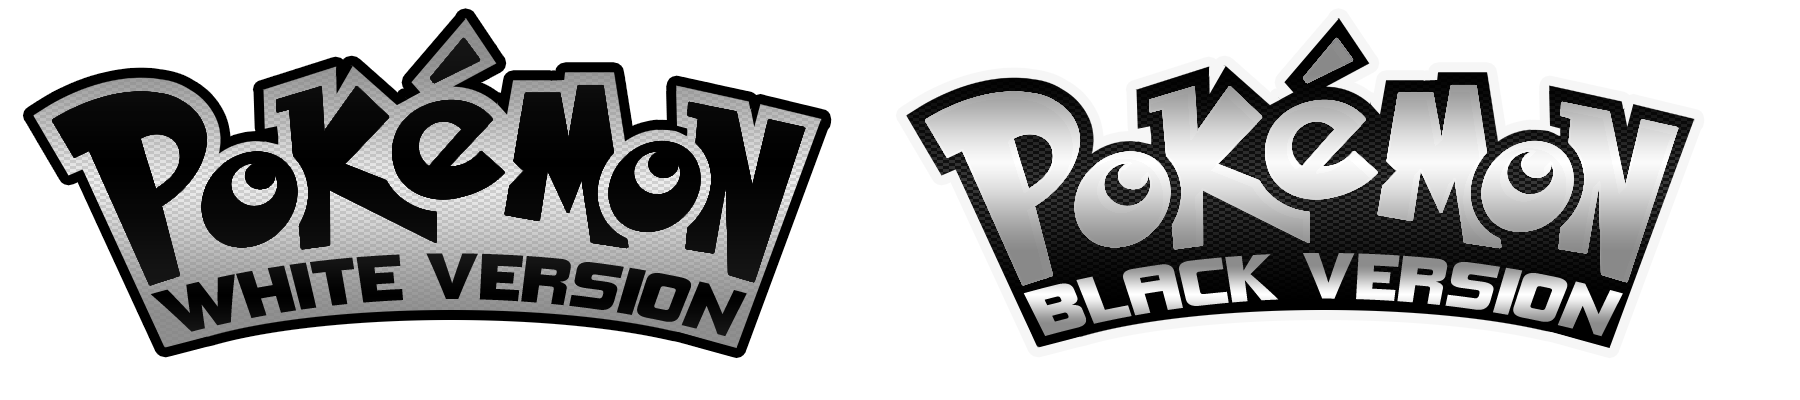  and just the usual Pokémon logo with "Black/White Version" underneath in 